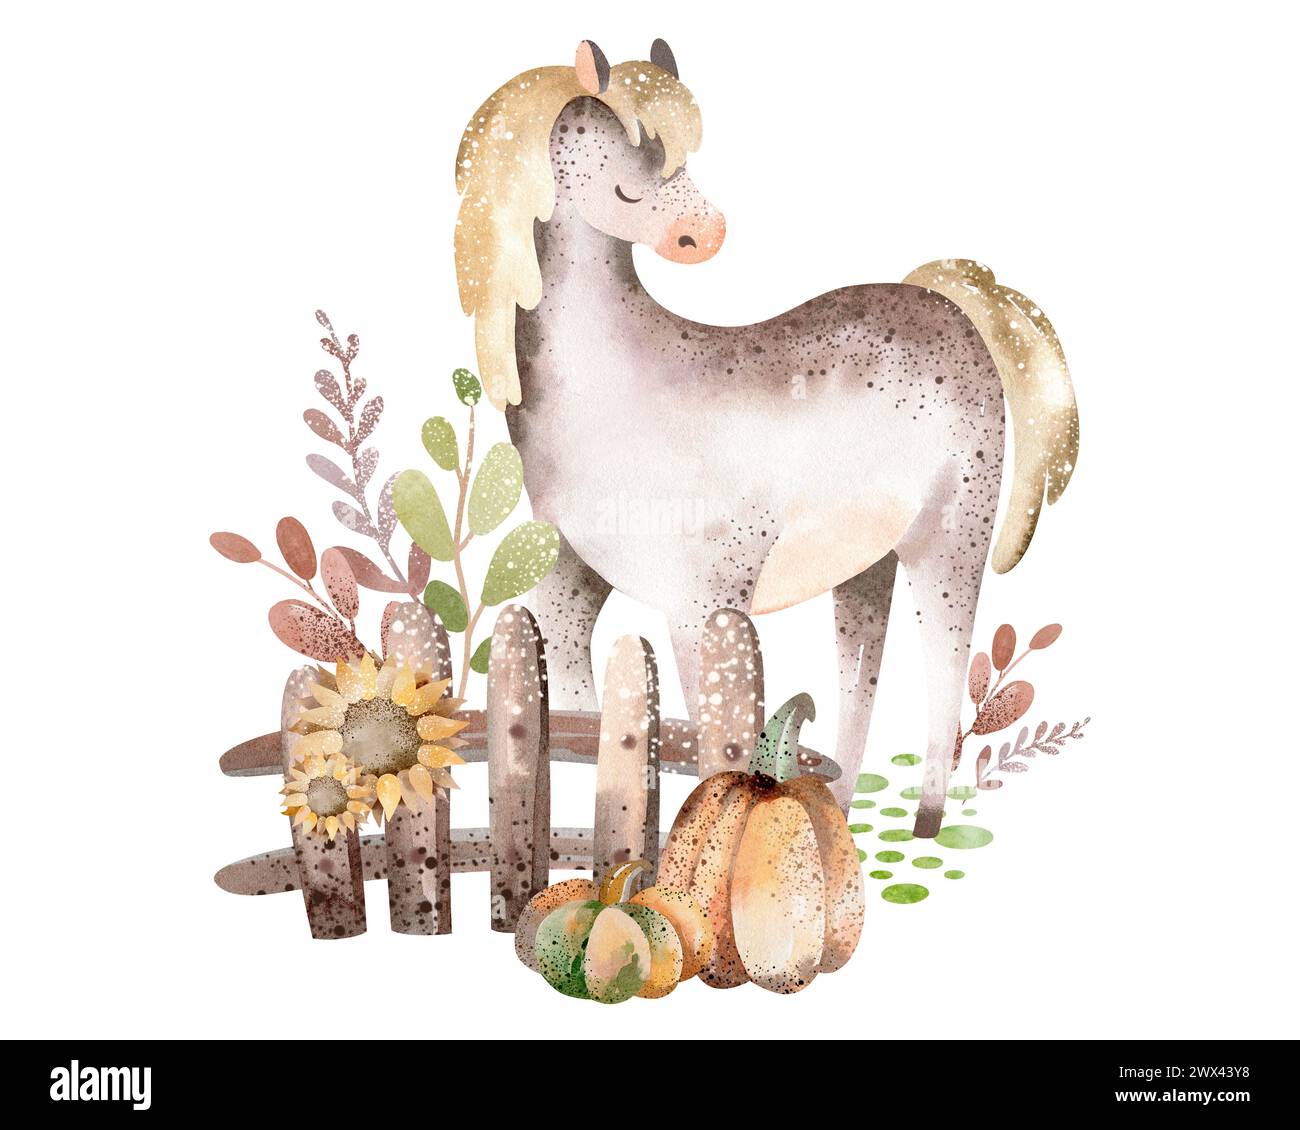 Watercolor cartoon horse.Cute pony stands near a fence with pumpkins.Stallion posing on a white background. Children hand drawn illustration of livest Stock Photo